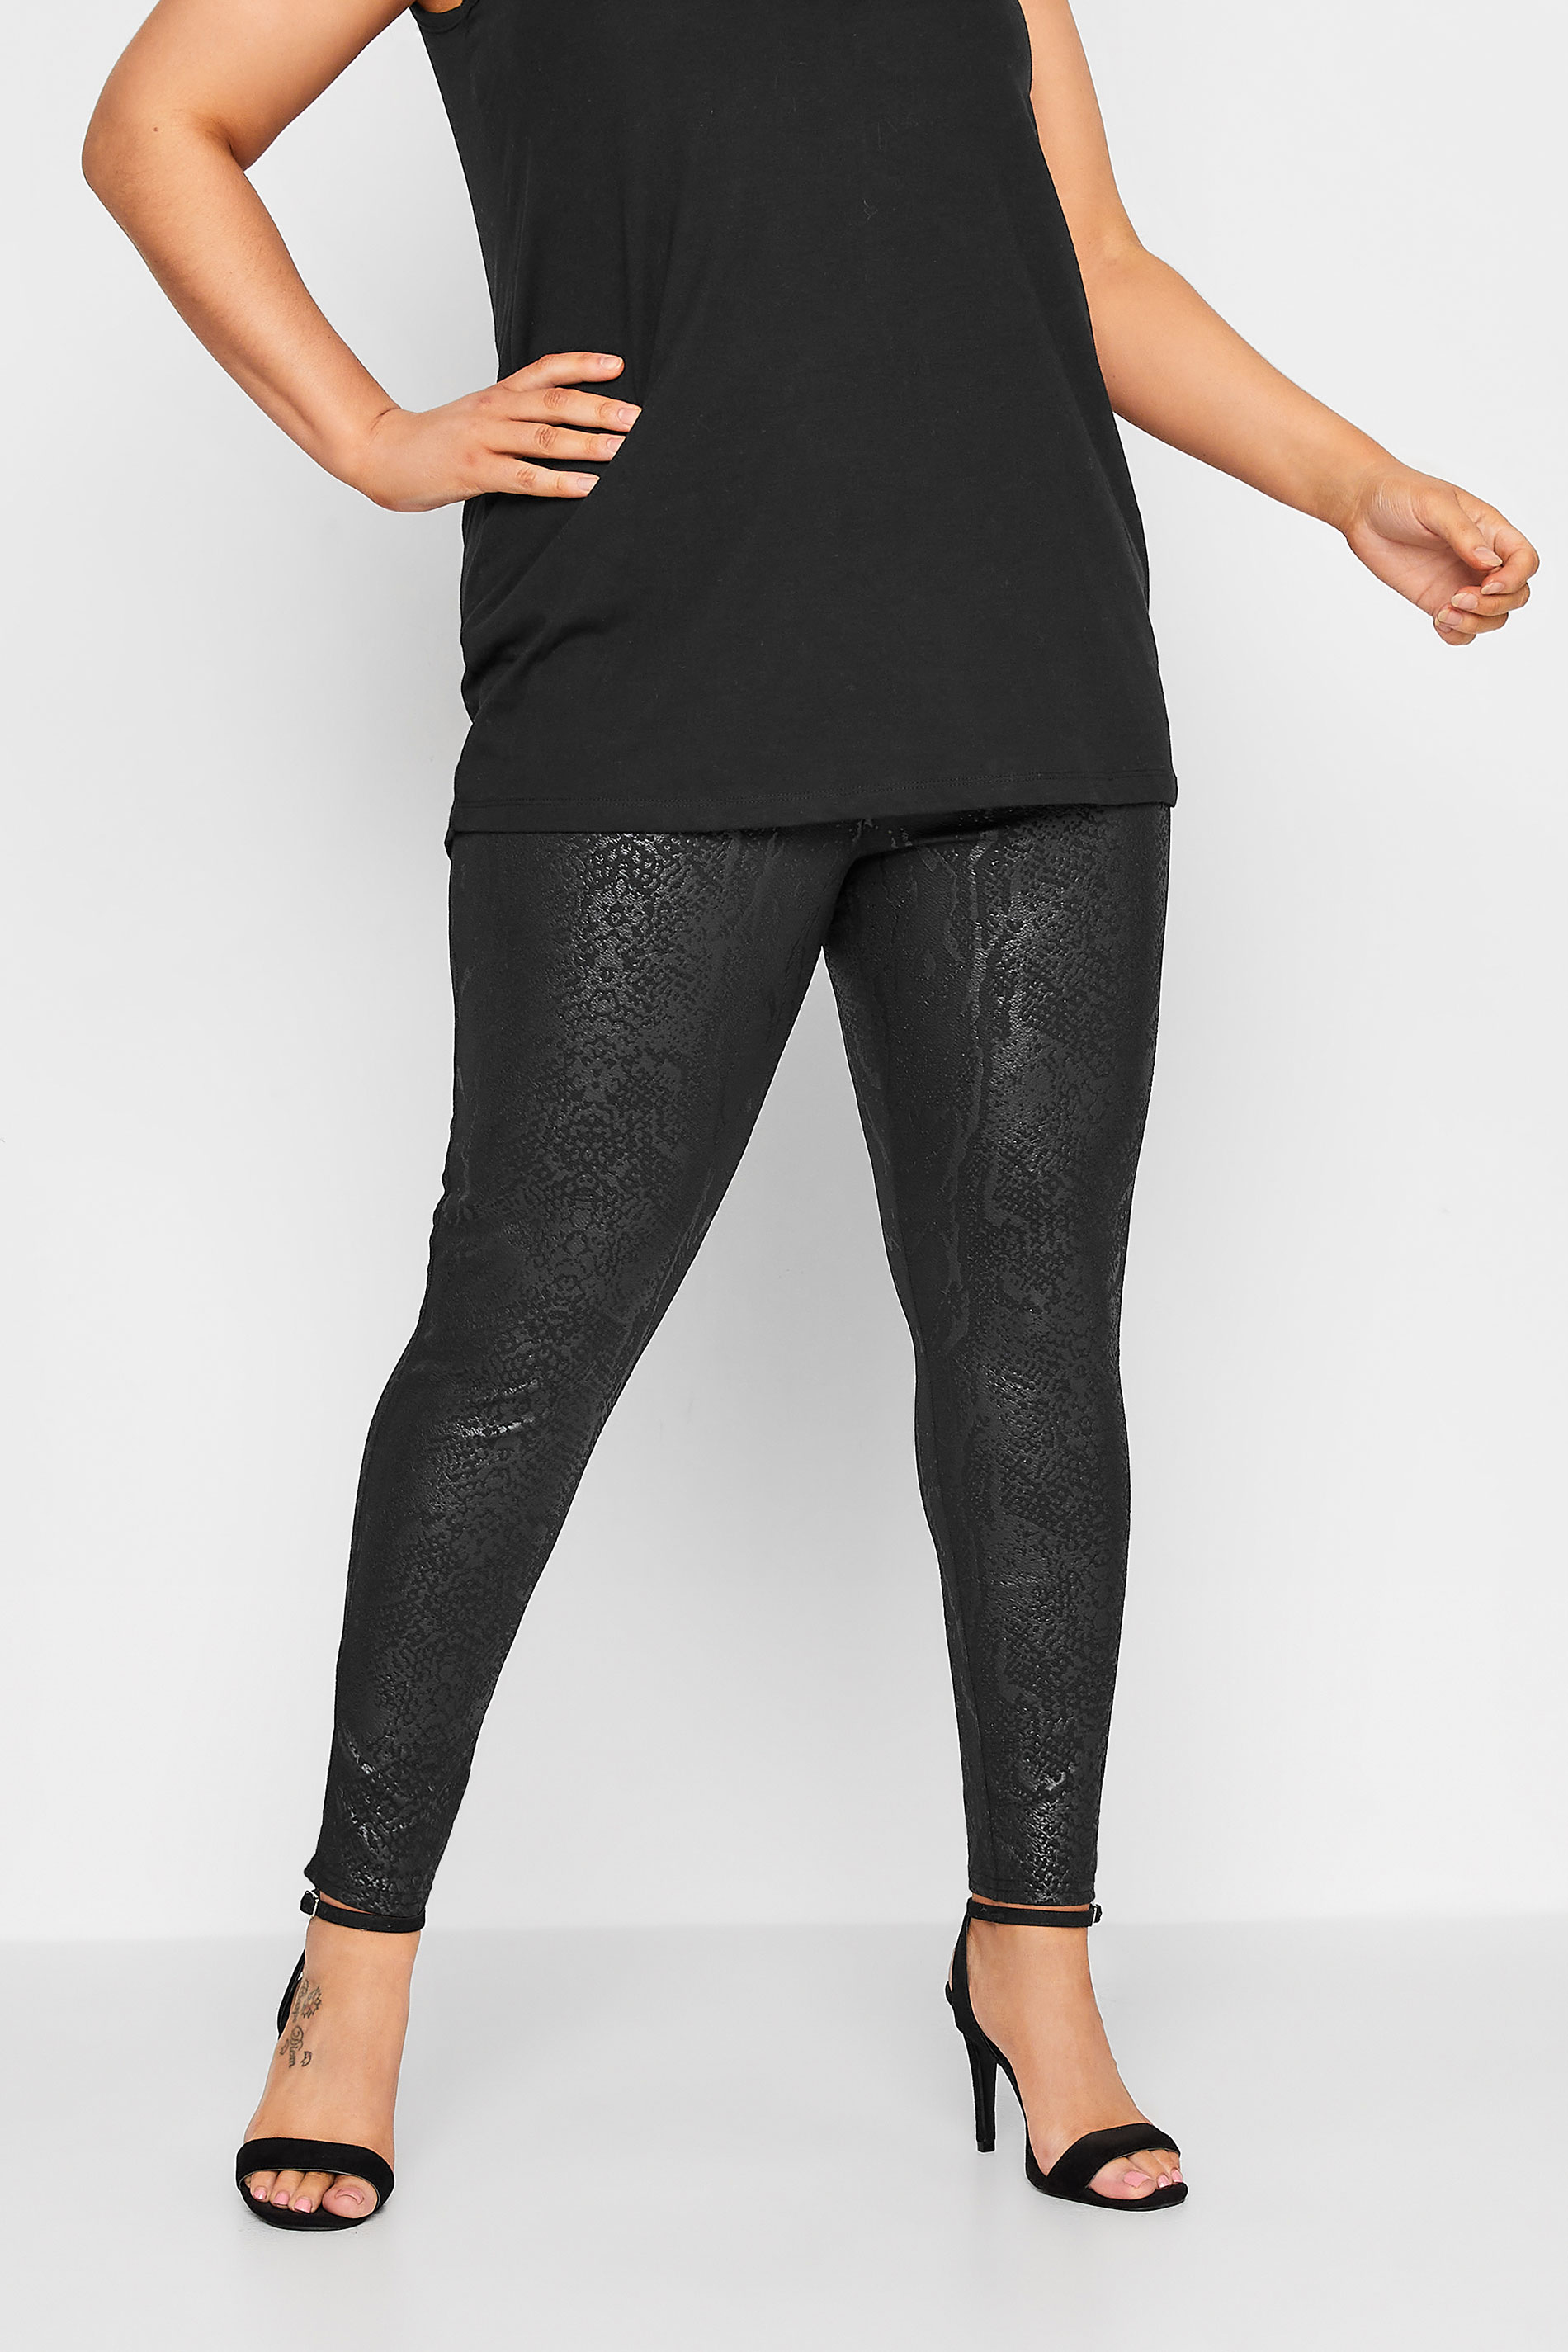 Plus Size Black Snake Print Leather Look Leggings | Yours Clothing 1